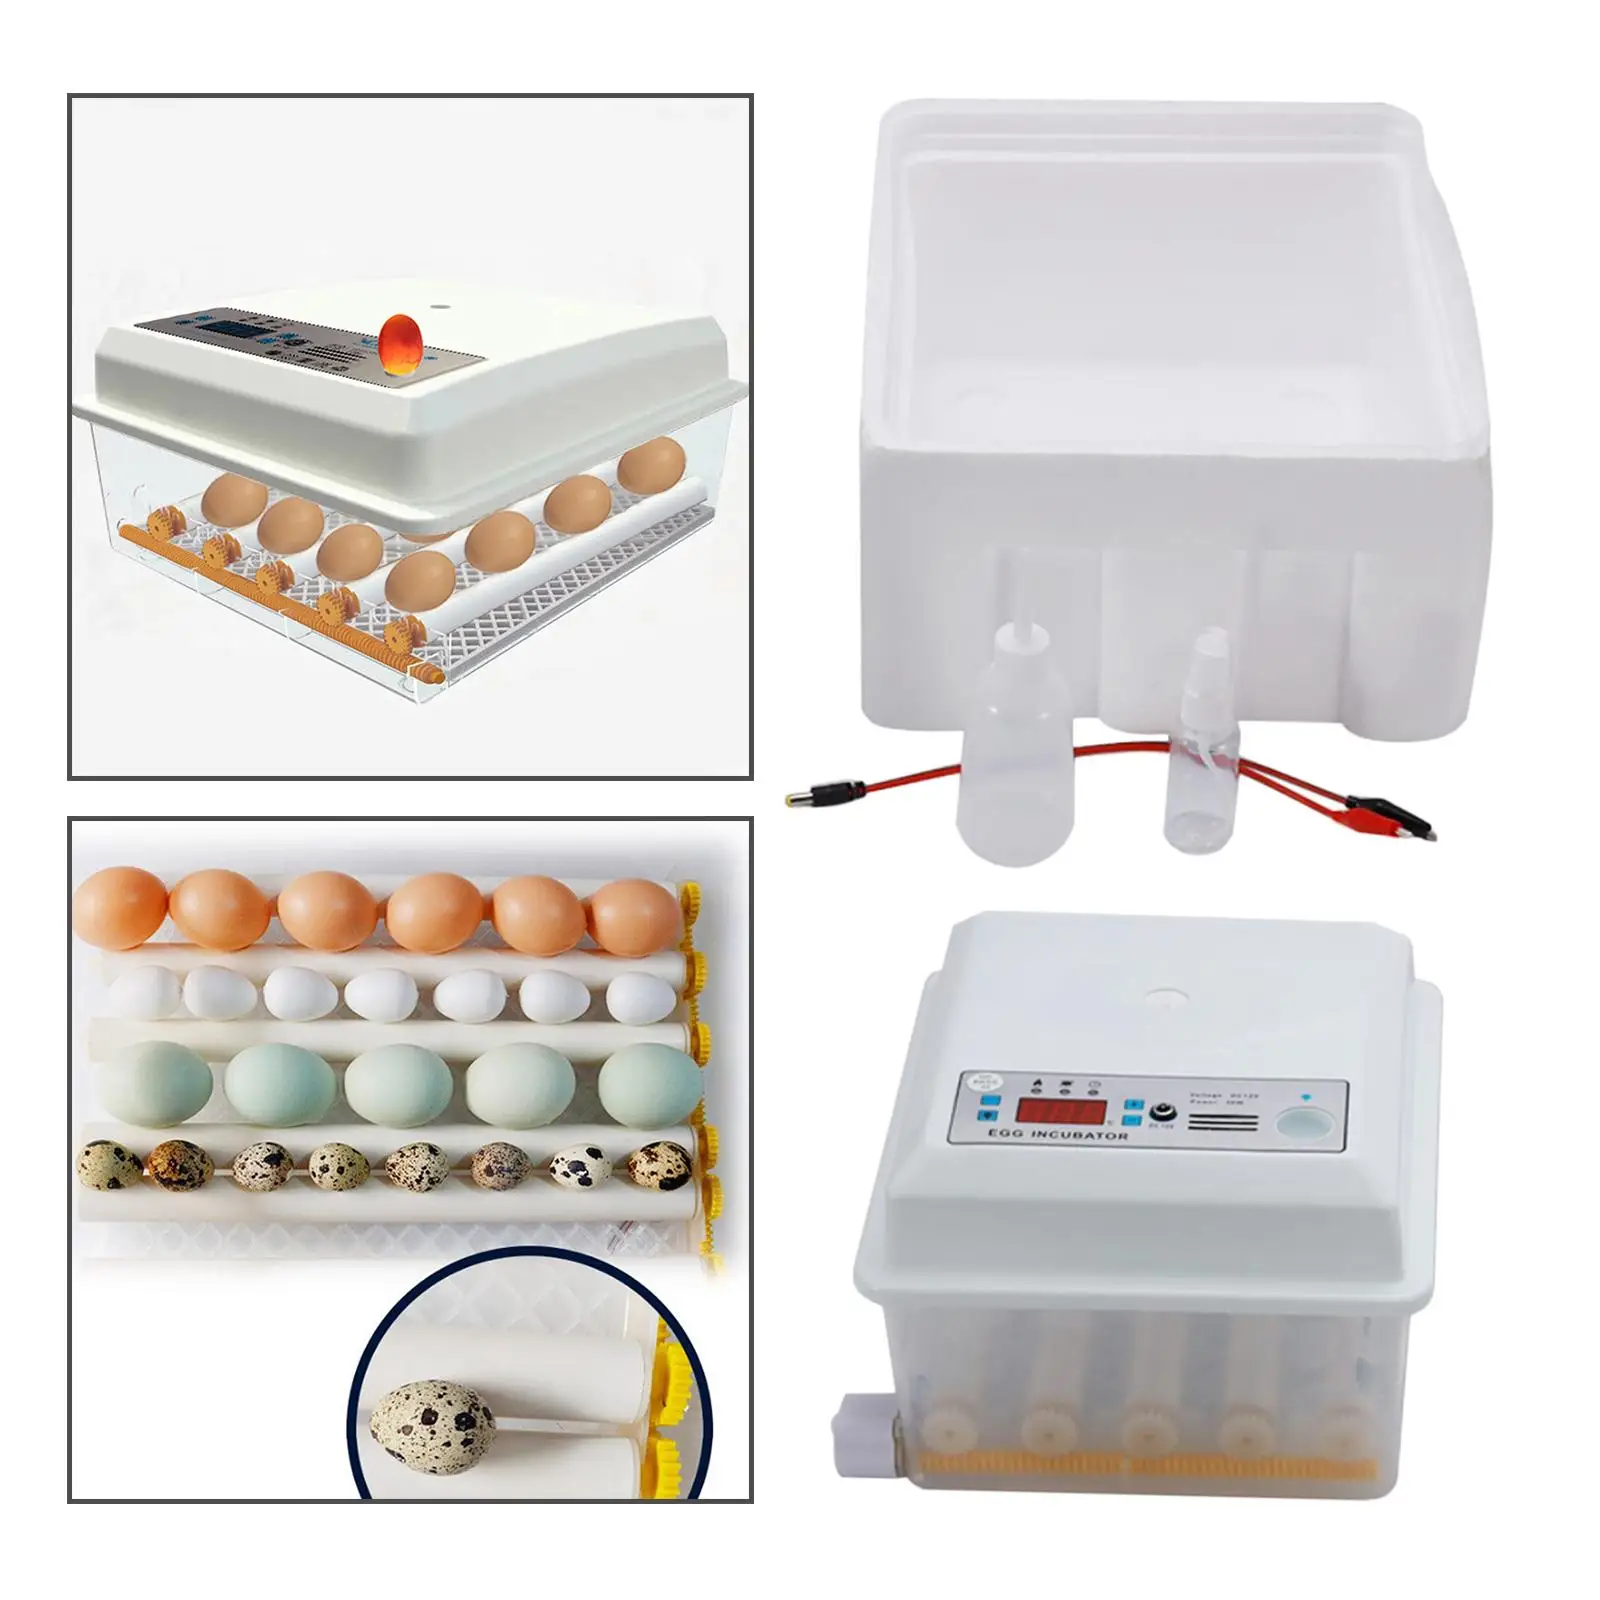 Egg Incubator, 16/36 Mini Digital Automatic Incubator for Chicken Quail Eggs, Poultry Hatcher for Hatching Ducks Goose Birds